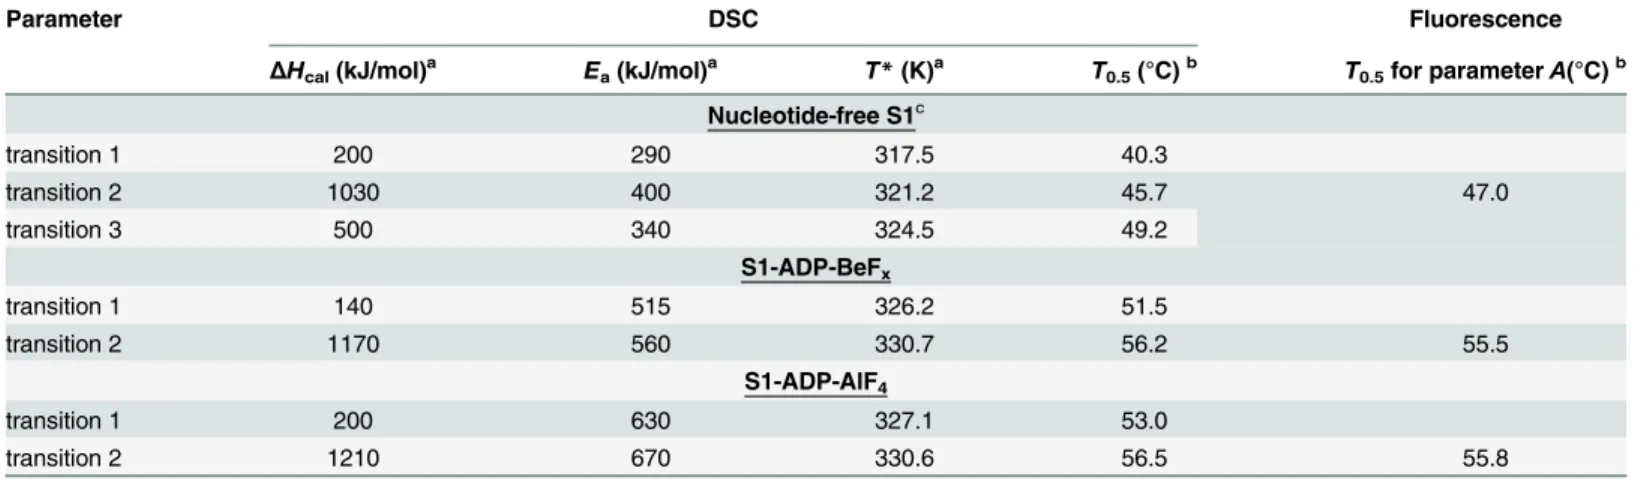 Table 1. The main parameters extracted from the DSC data for each thermal transition of S1 in the absence of added nucleotides and in the com- com-plexes S1-ADP-BeF x or S1-ADP-AlF 4 - ( Δ H cal , E a , T * , and T 0.5 ), as well as from temperature-induce